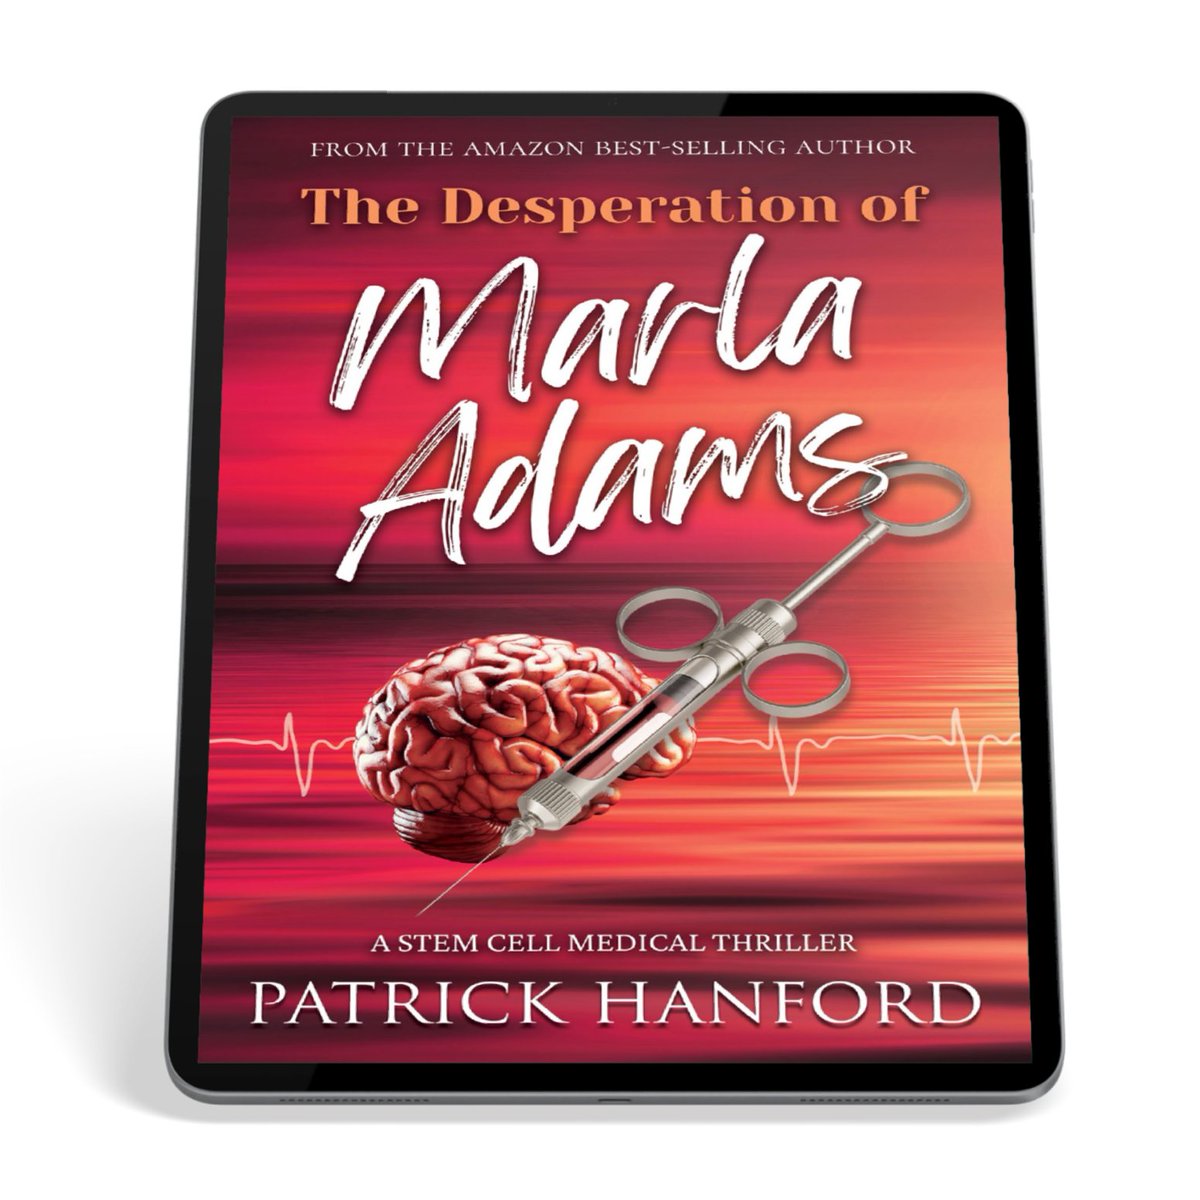 We're looking for Advanced Reader Copy Team members for Patrick Hanford's, The Desperation of Marla Adams.

Sign up here:  subscribepage.com/k4z7j1

#ARCReaders #ARCReadersWanted #PatrickHanford #MarlaAdams